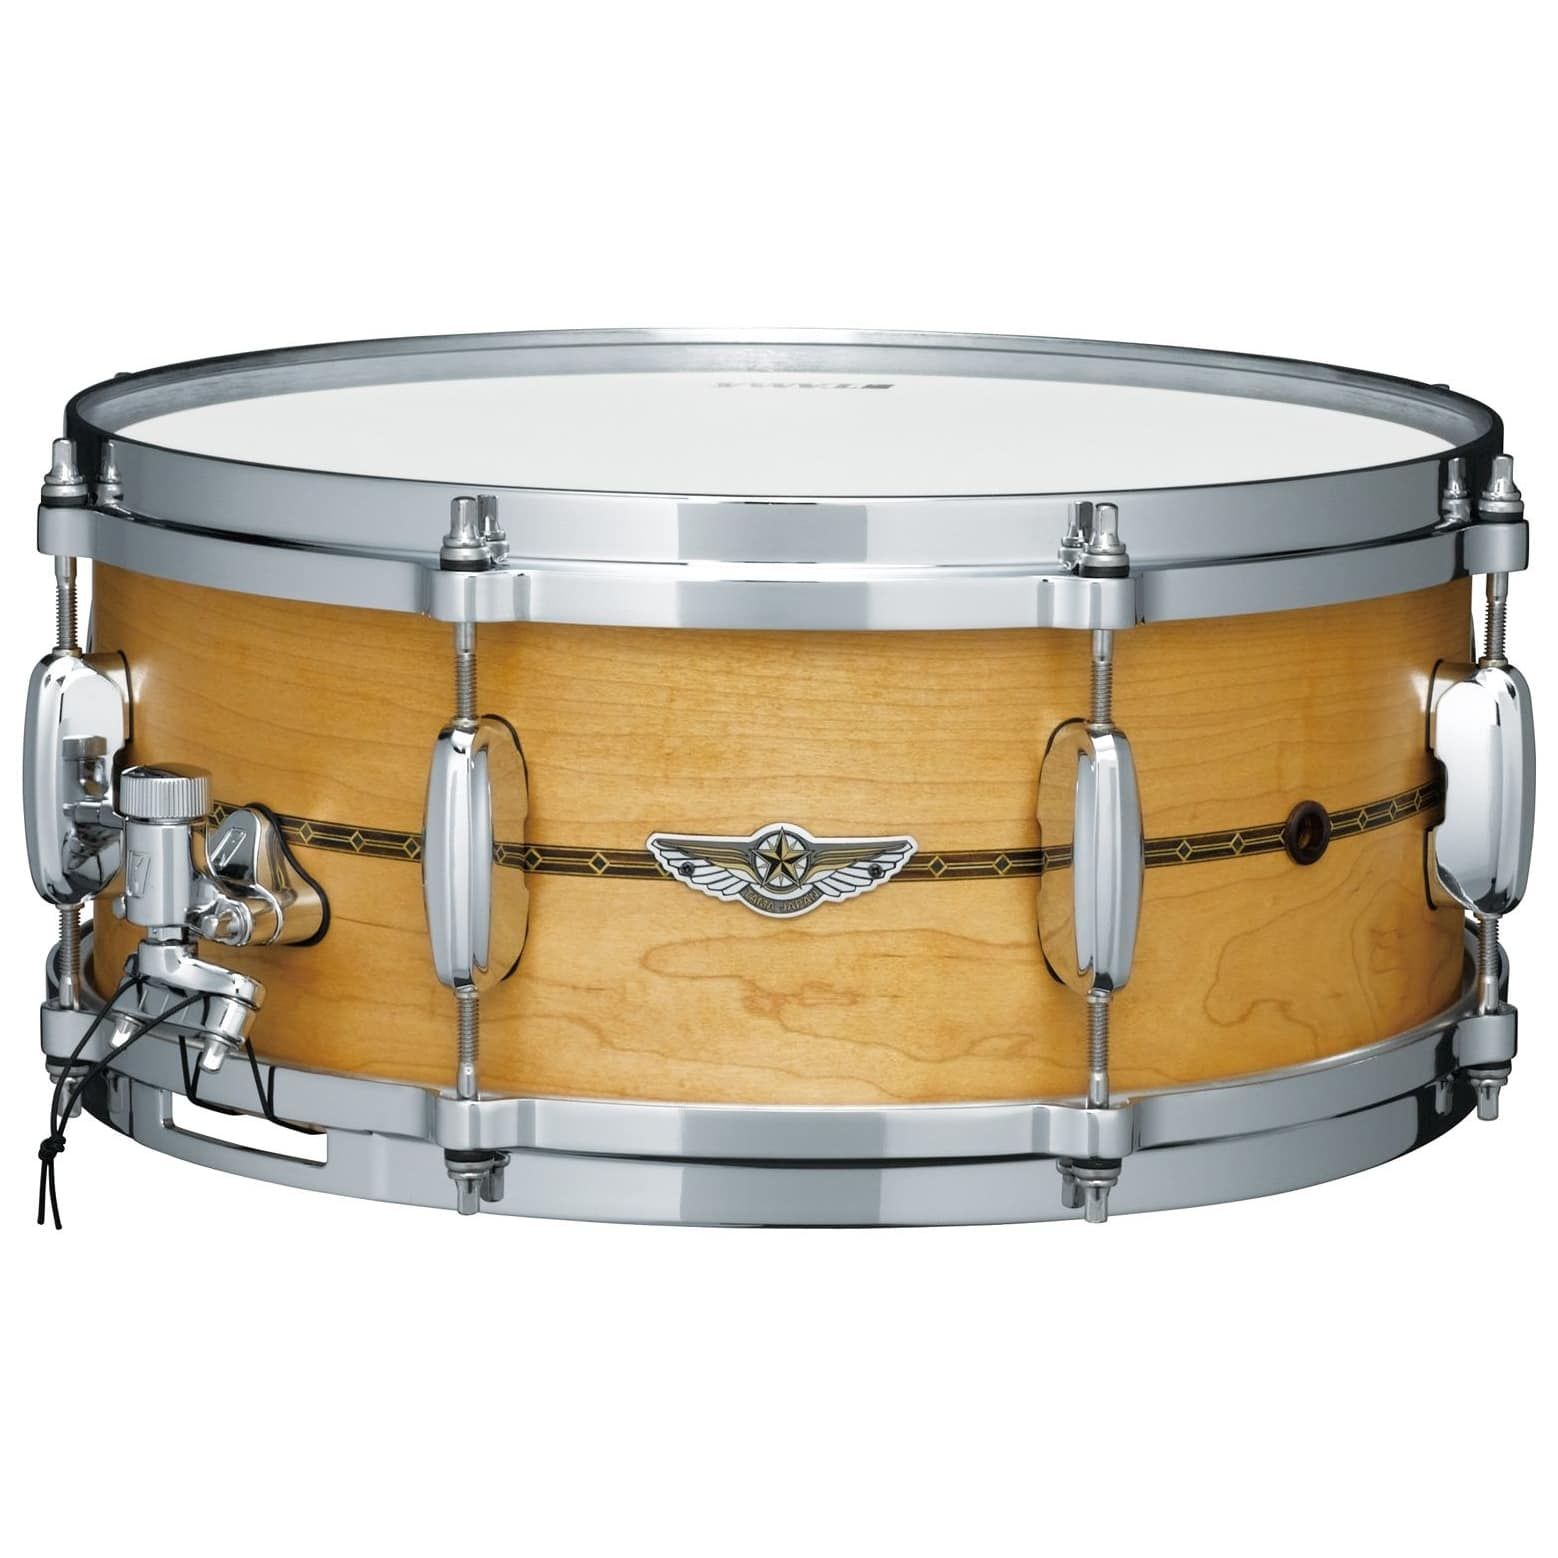 Tama TLM146S-OMP STAR Snare Drum - Oiled Natural Maple 14" x 6"